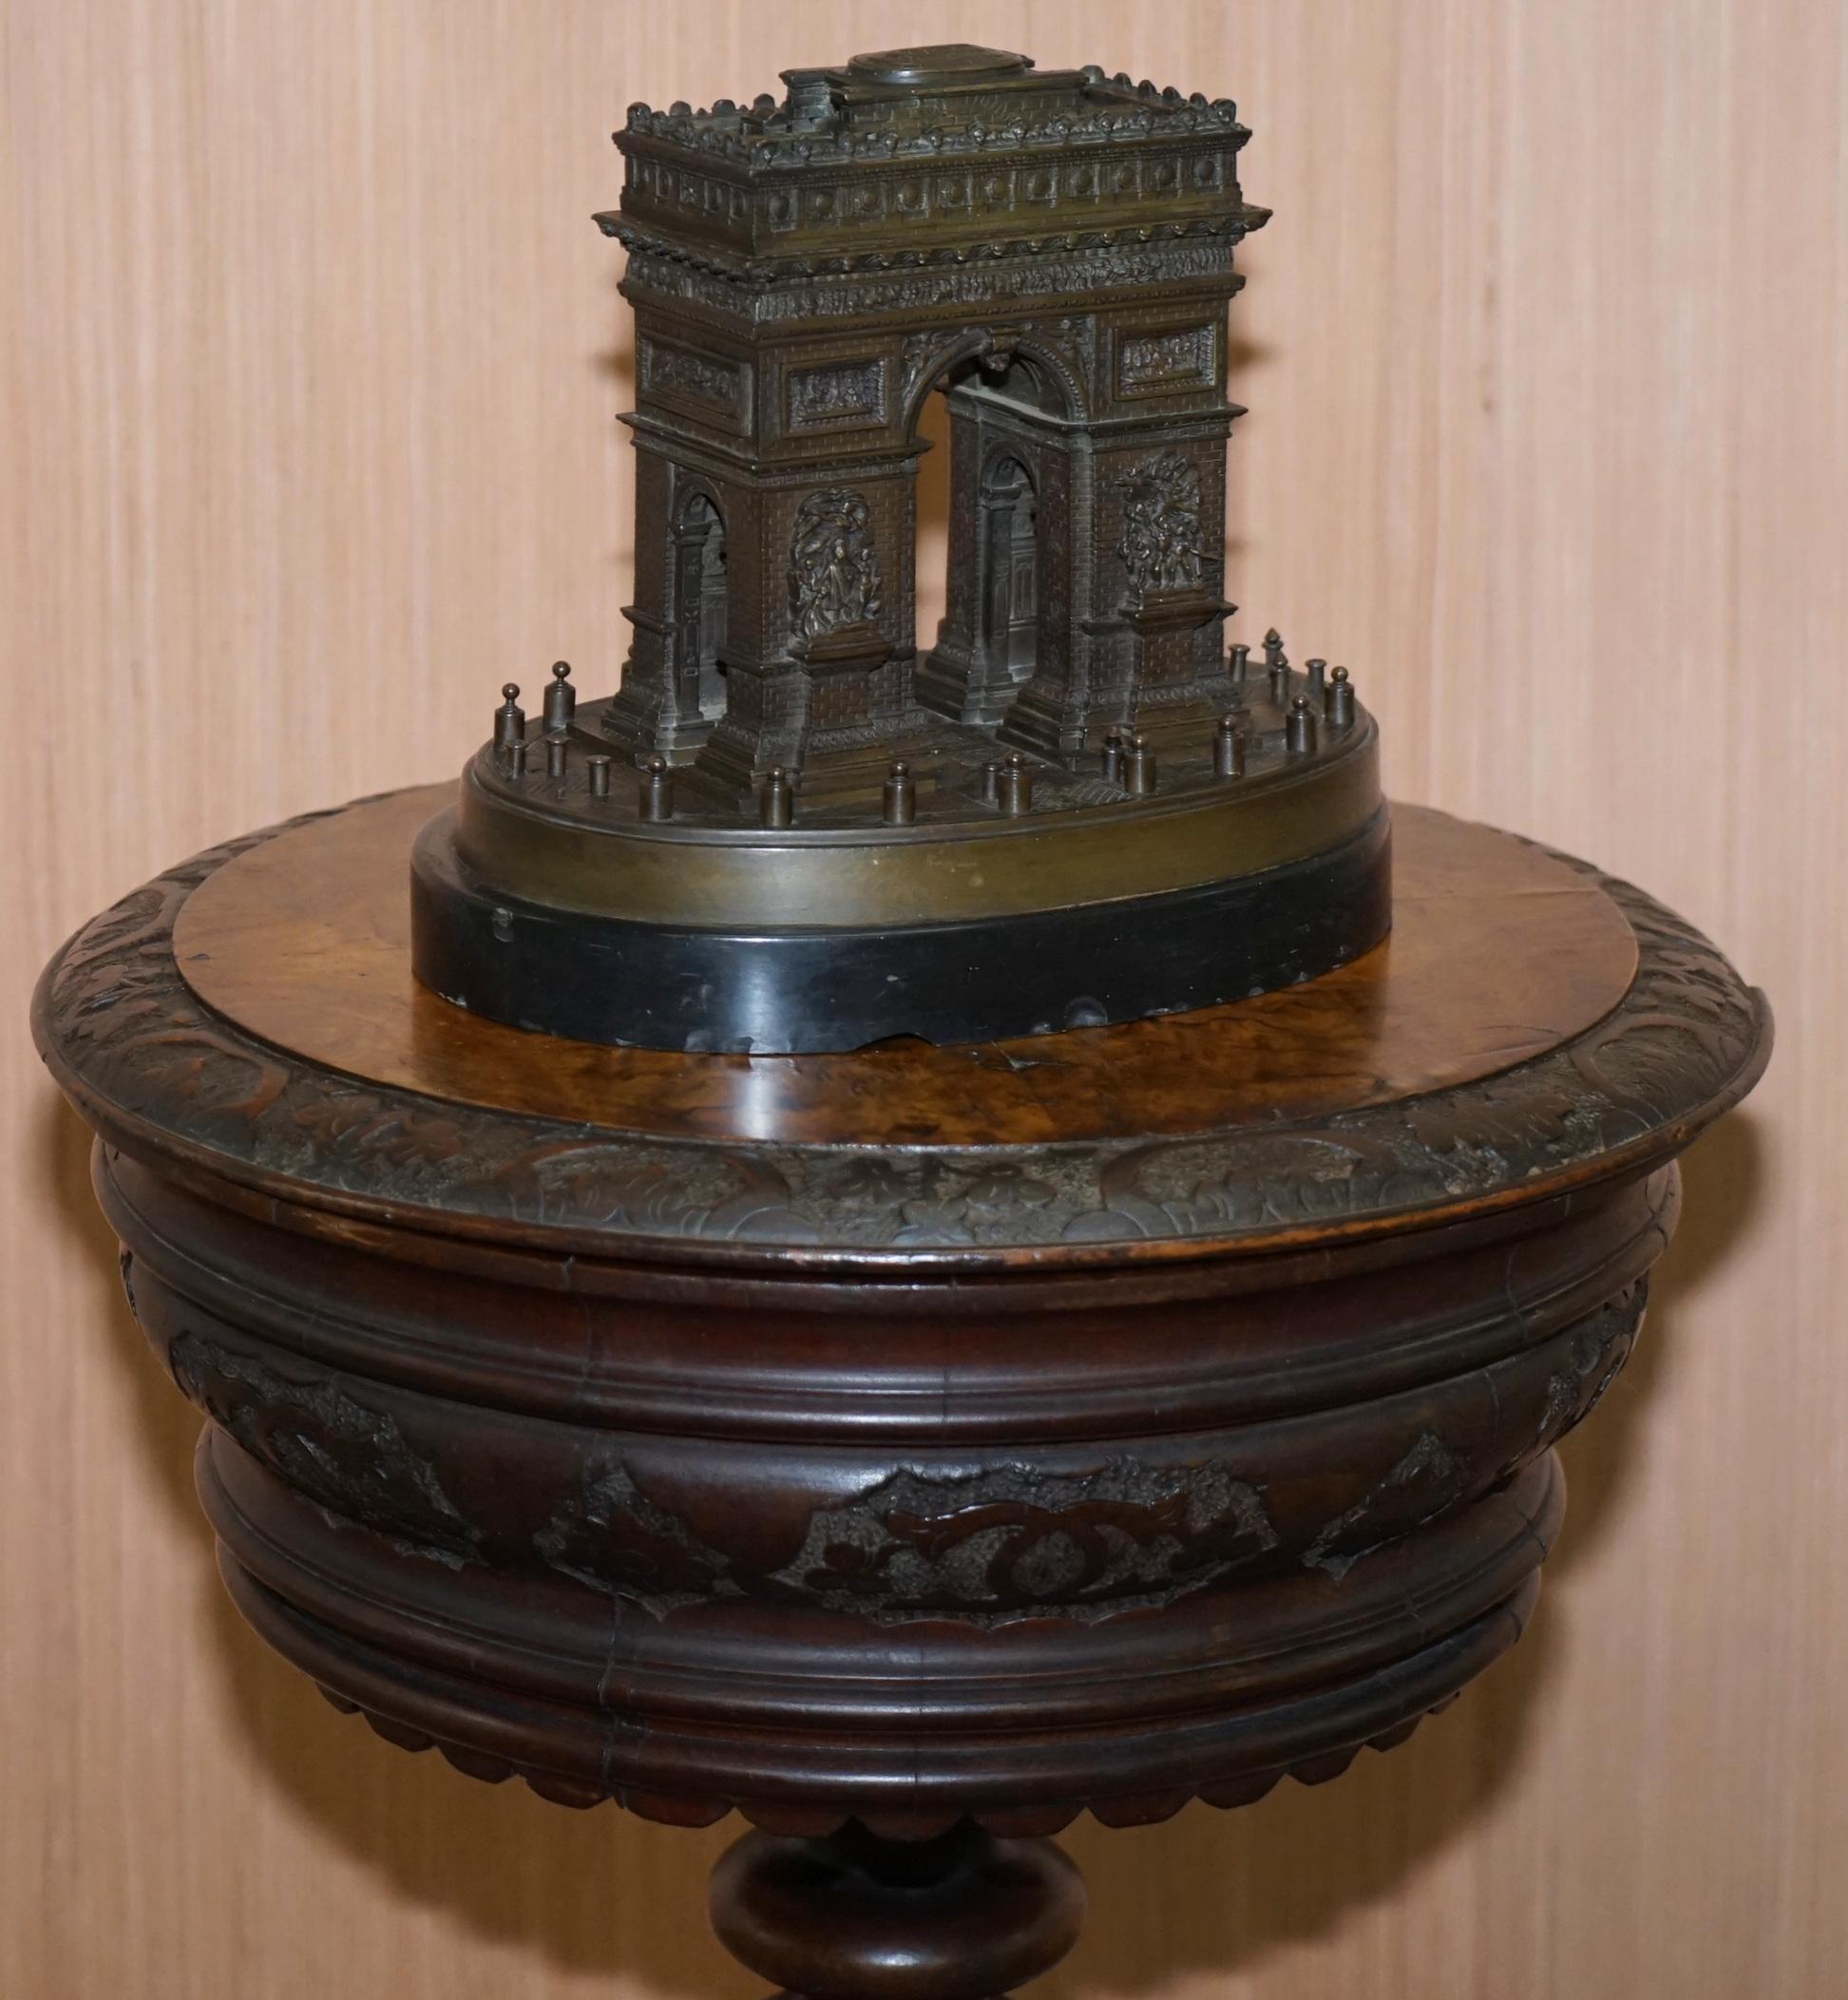 We are delighted to offer for sale this stunning and very rare early 19th century solid bronze with marble base Grand Tour model of the Arc De Triomph by the world renown French company of LeBlanc Freres

This piece is fully stamped, three times